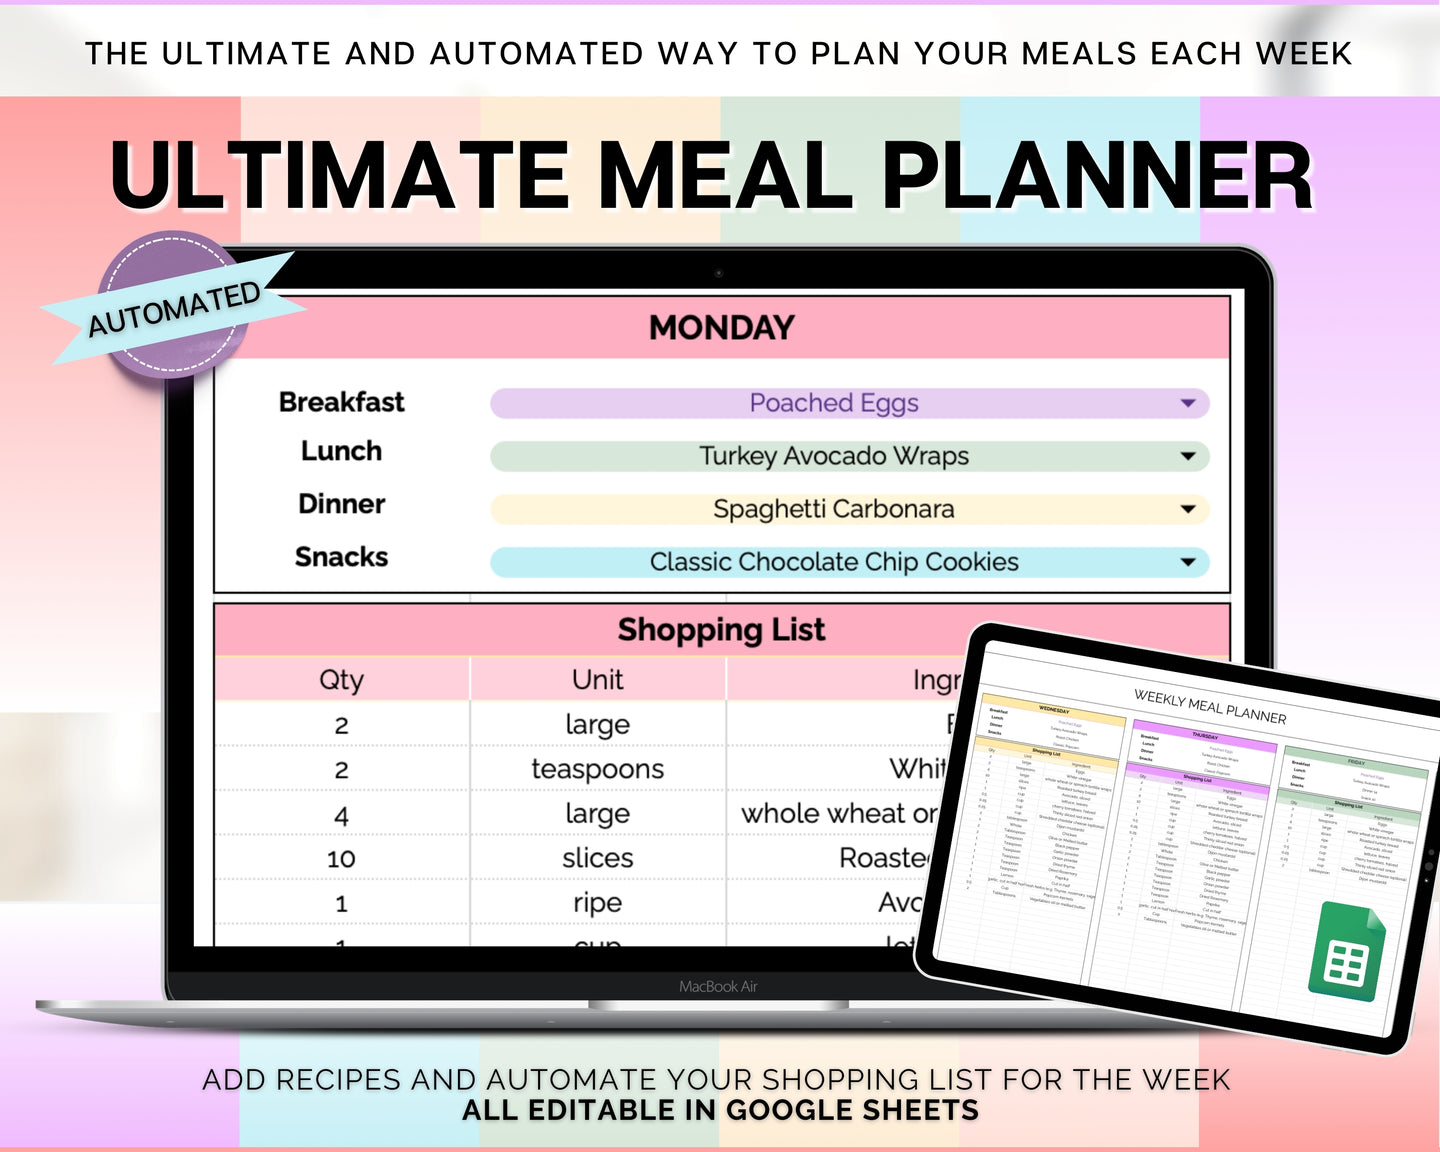 Ultimate Meal Planner Spreadsheet | Perfect Recipe Template with AUTOMATED Grocery List, Family Meal Prep, Weekly Meal Plan & Shopping List | Google Sheets | Colorful